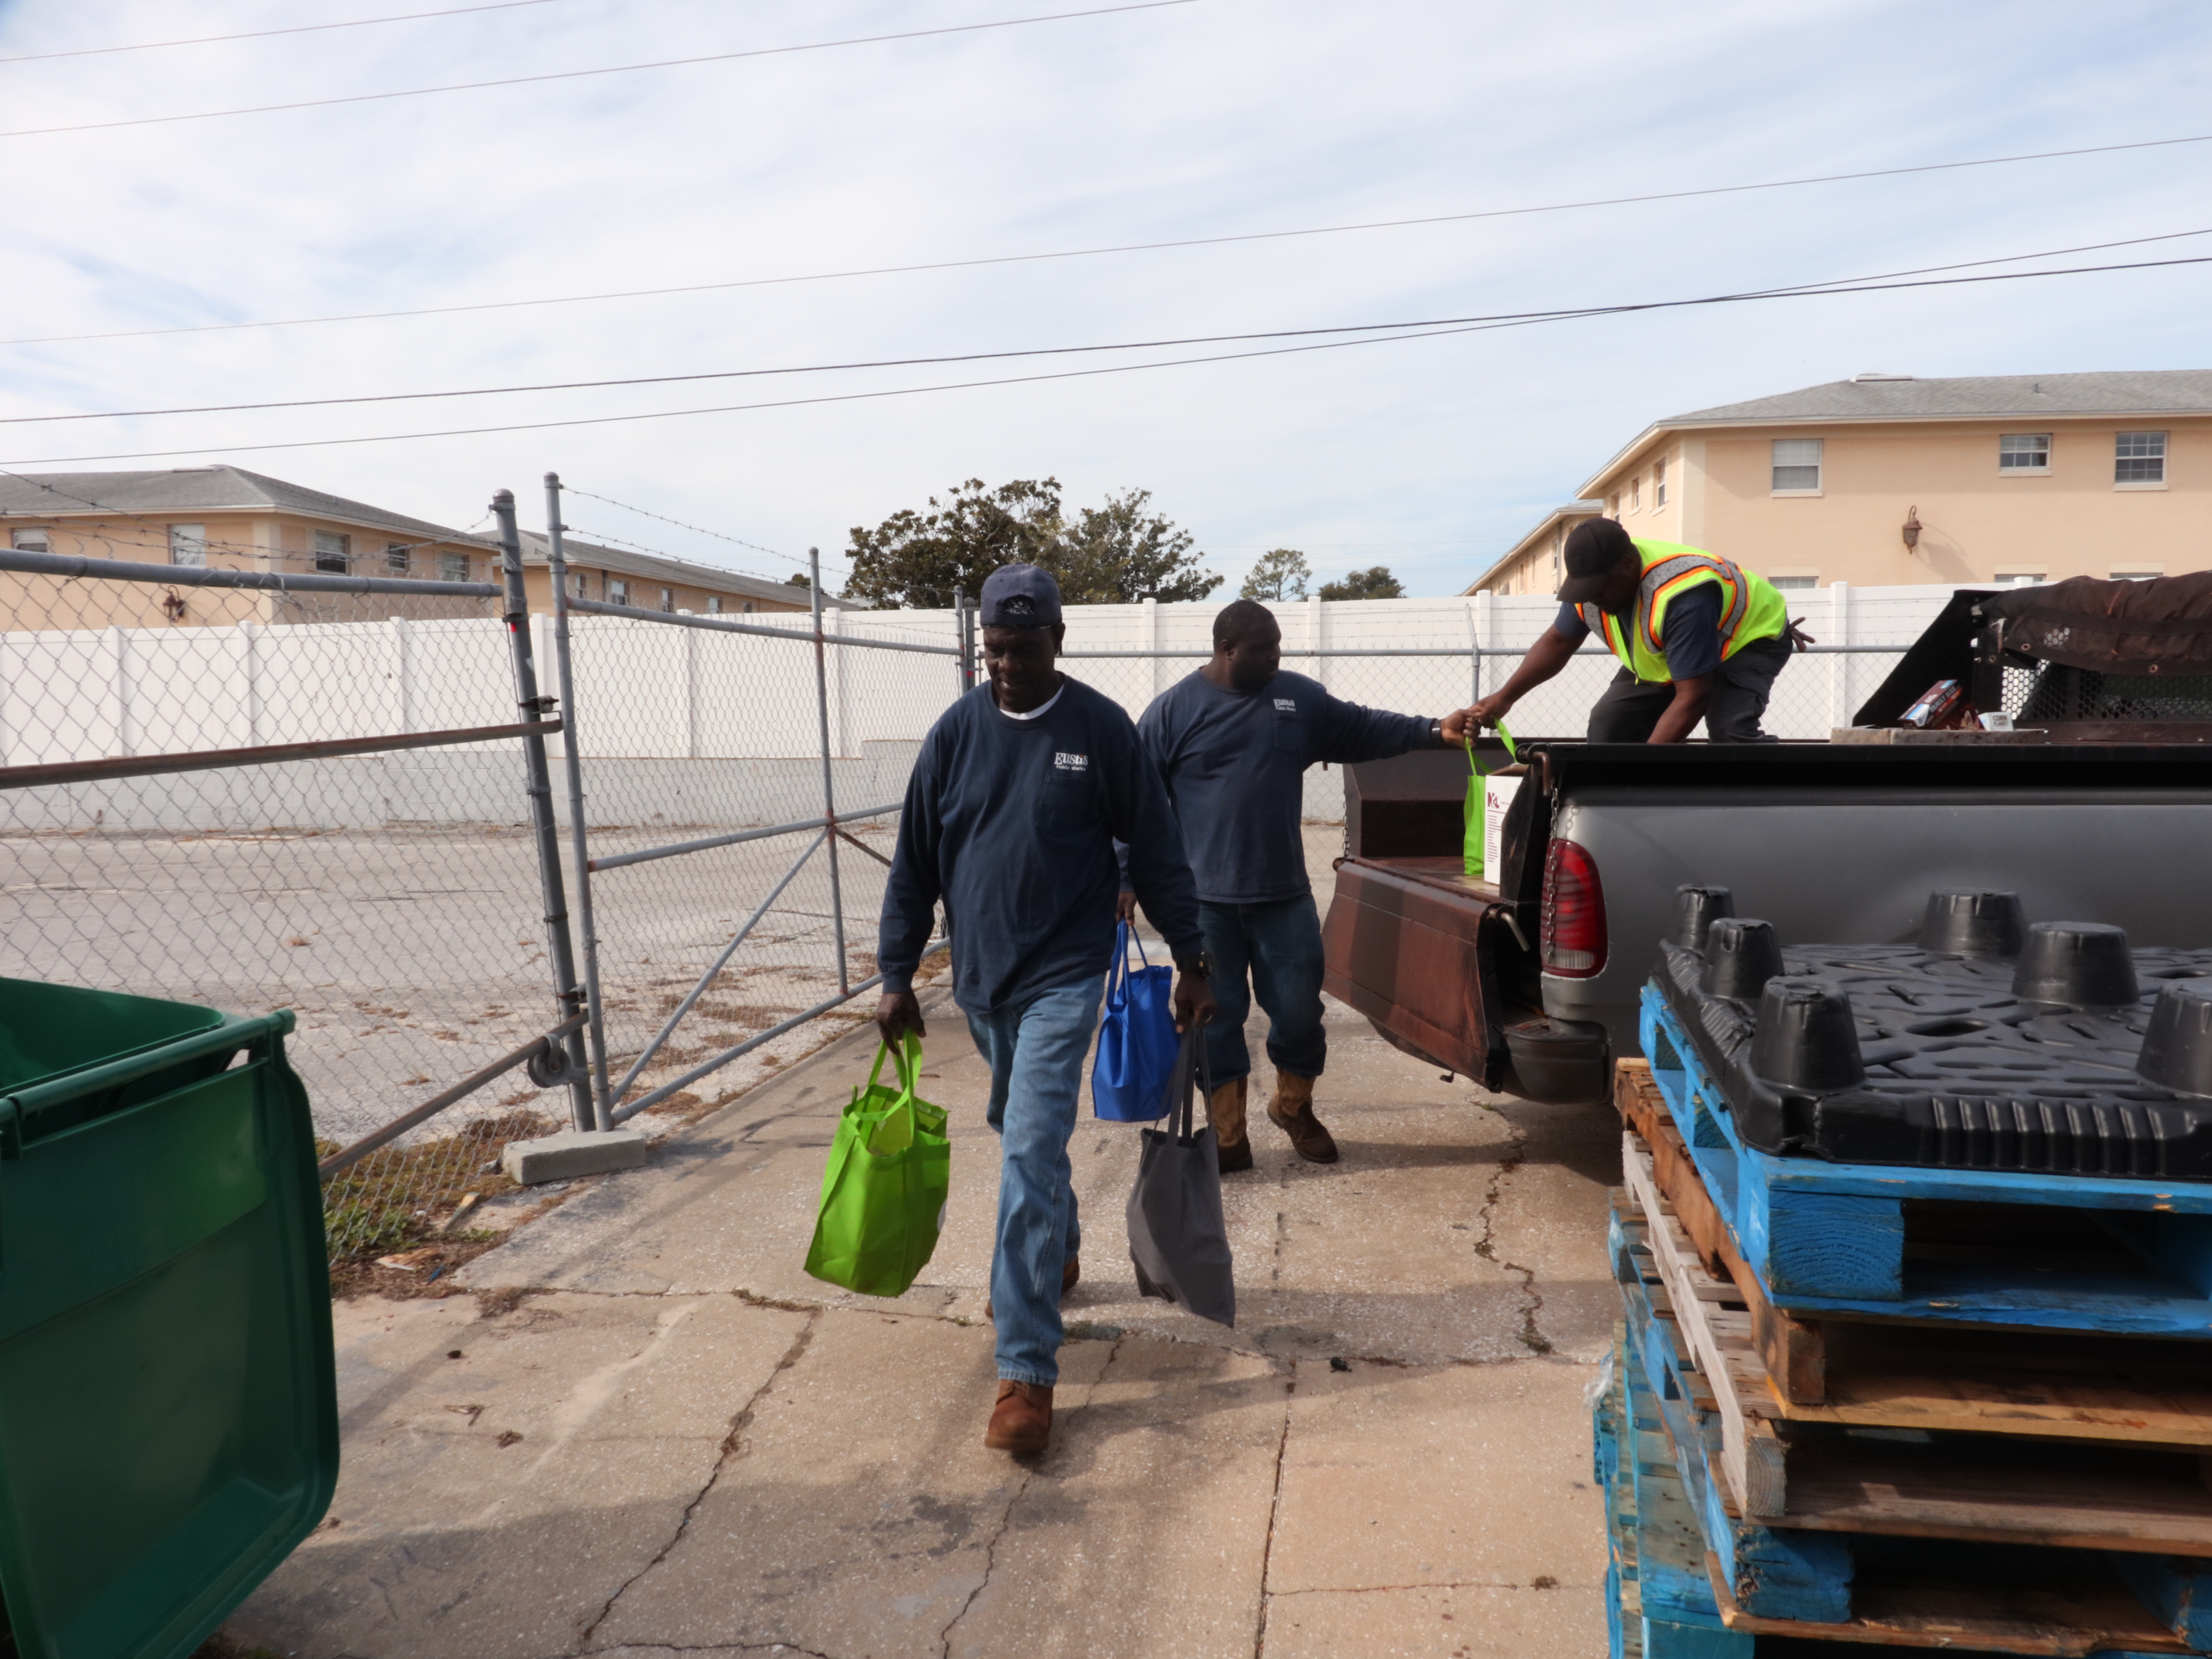 Public Works delivering bags of donations to W.I.N 1 Ministries local food pantry